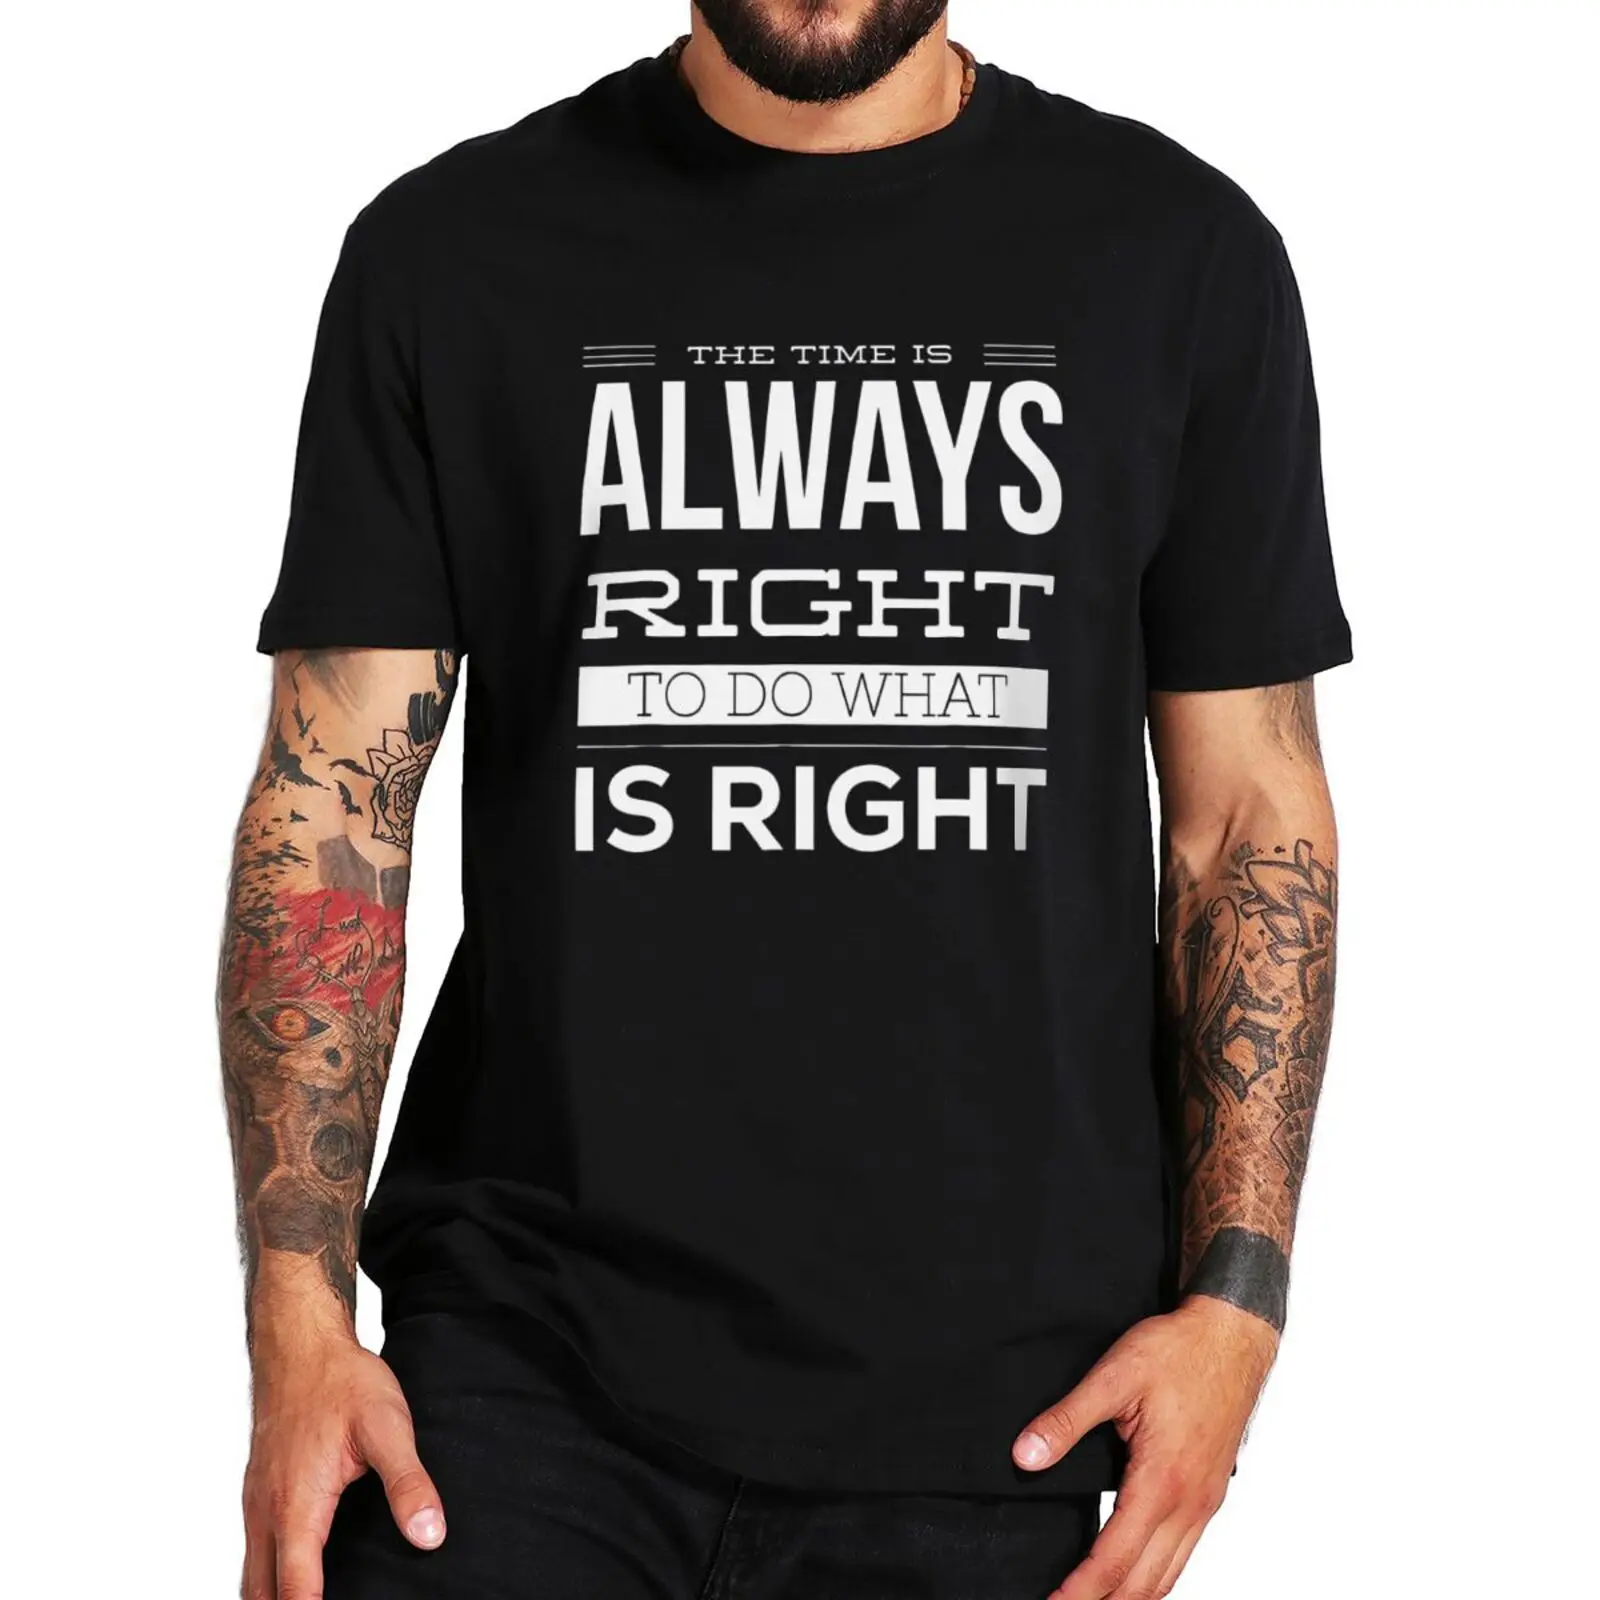 

The Time Is Always Right To Do What Is Right T Shirt Funny Saying Humor Gift Tee Tops 100% Cotton Unisex Casual T-shirts EU Size